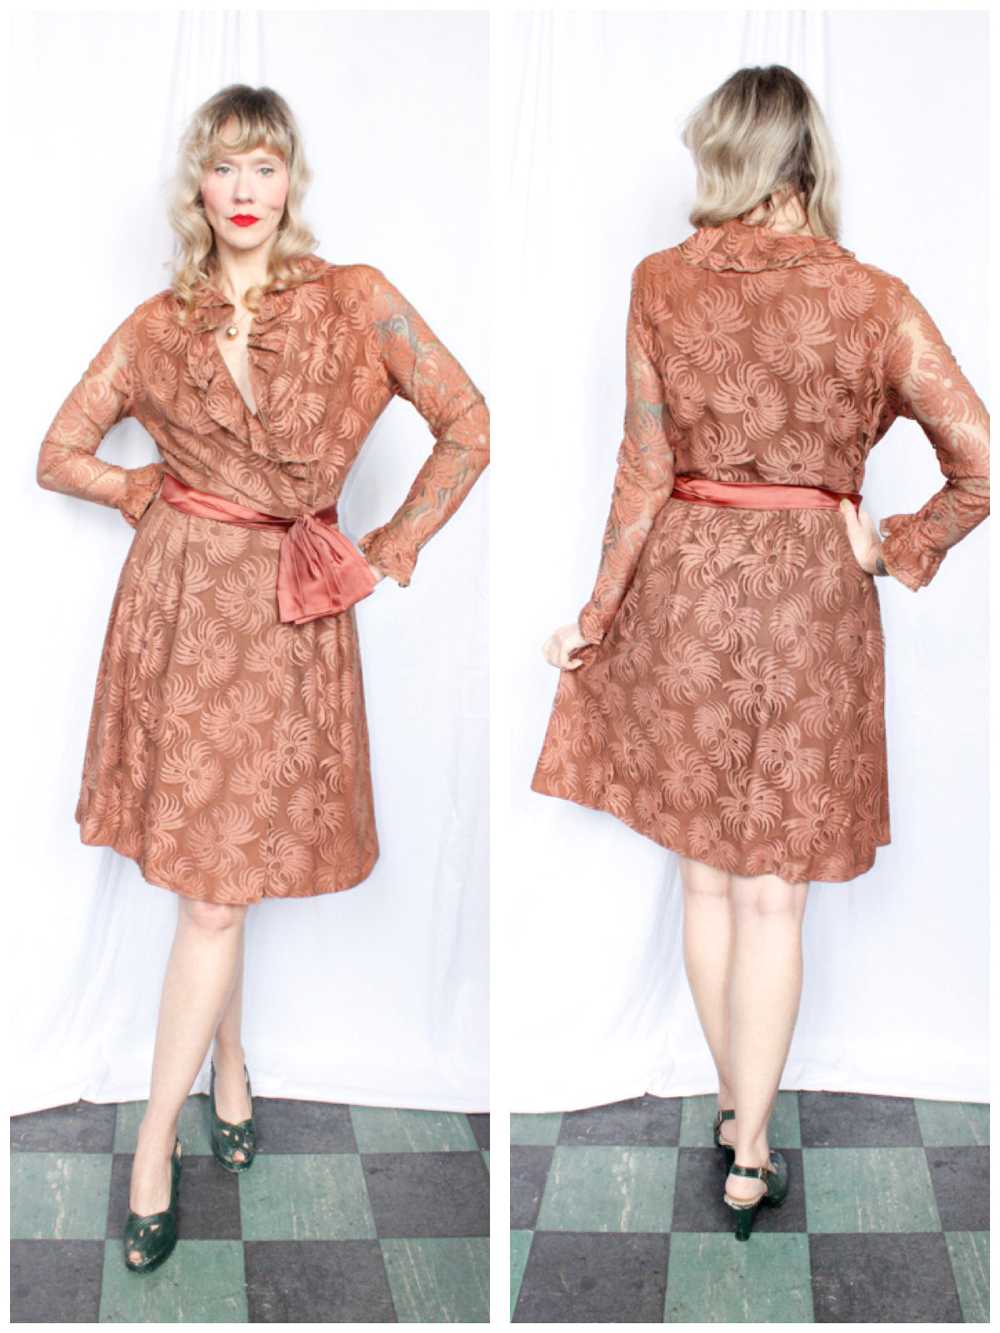 1960s Rose Brown Floral Lace Party Dress - Medium - image 1